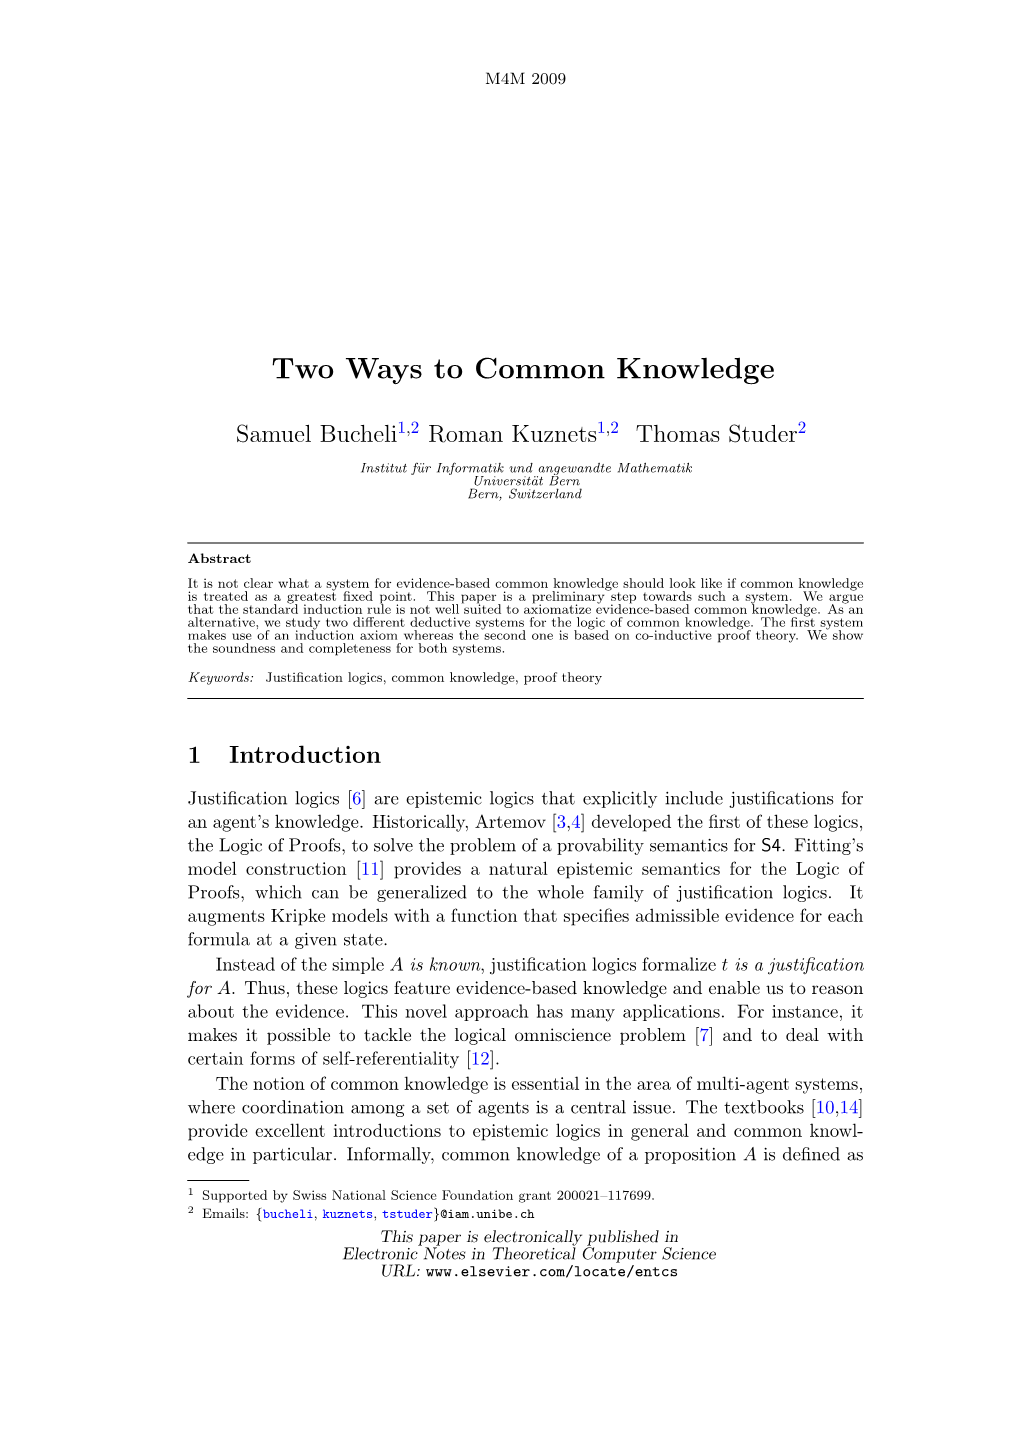 Two Ways to Common Knowledge